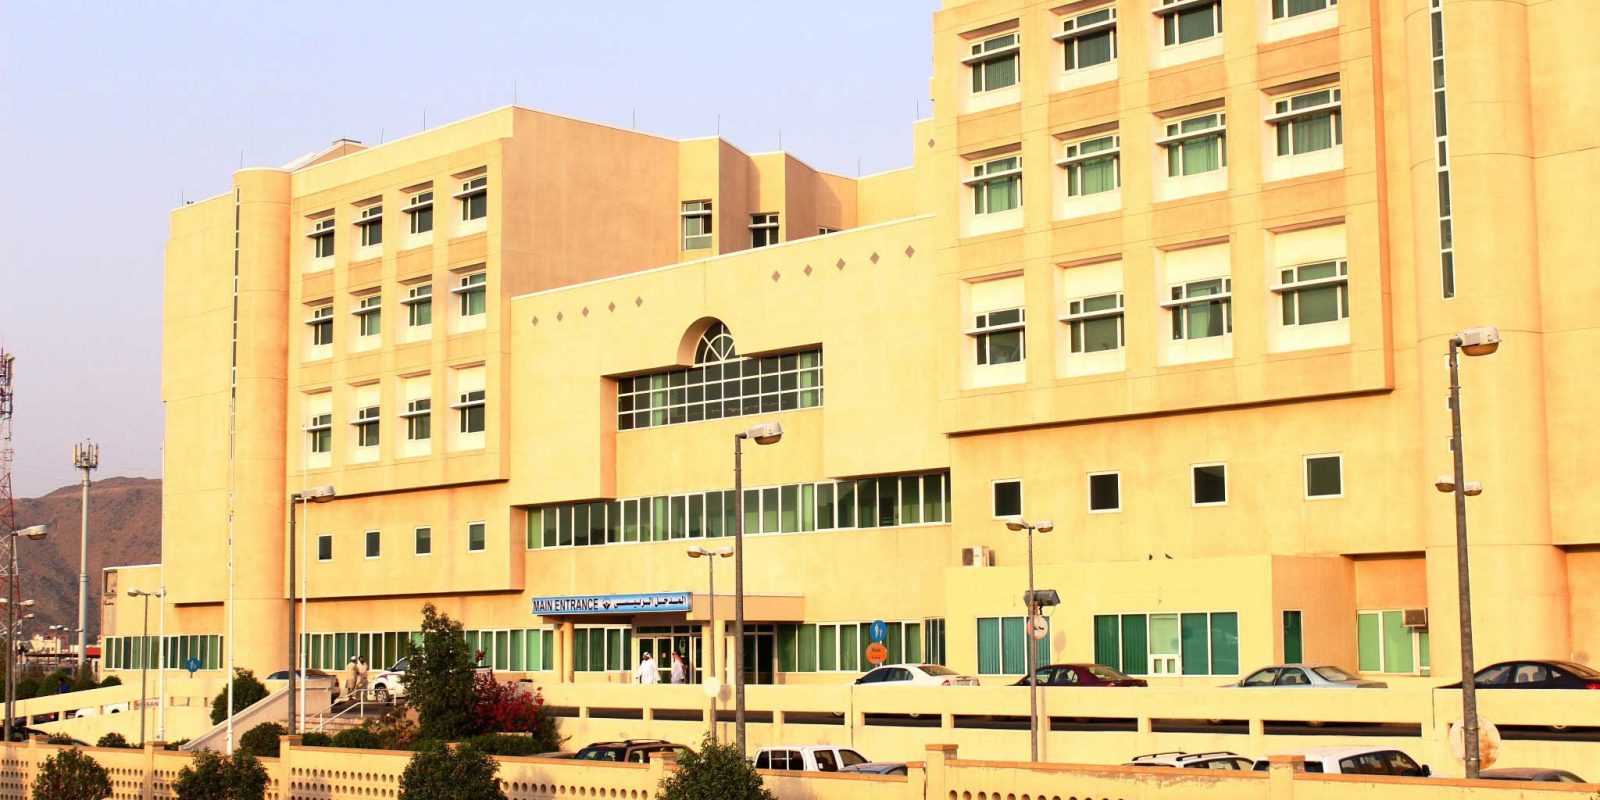 Medical Center of the Armed Forces